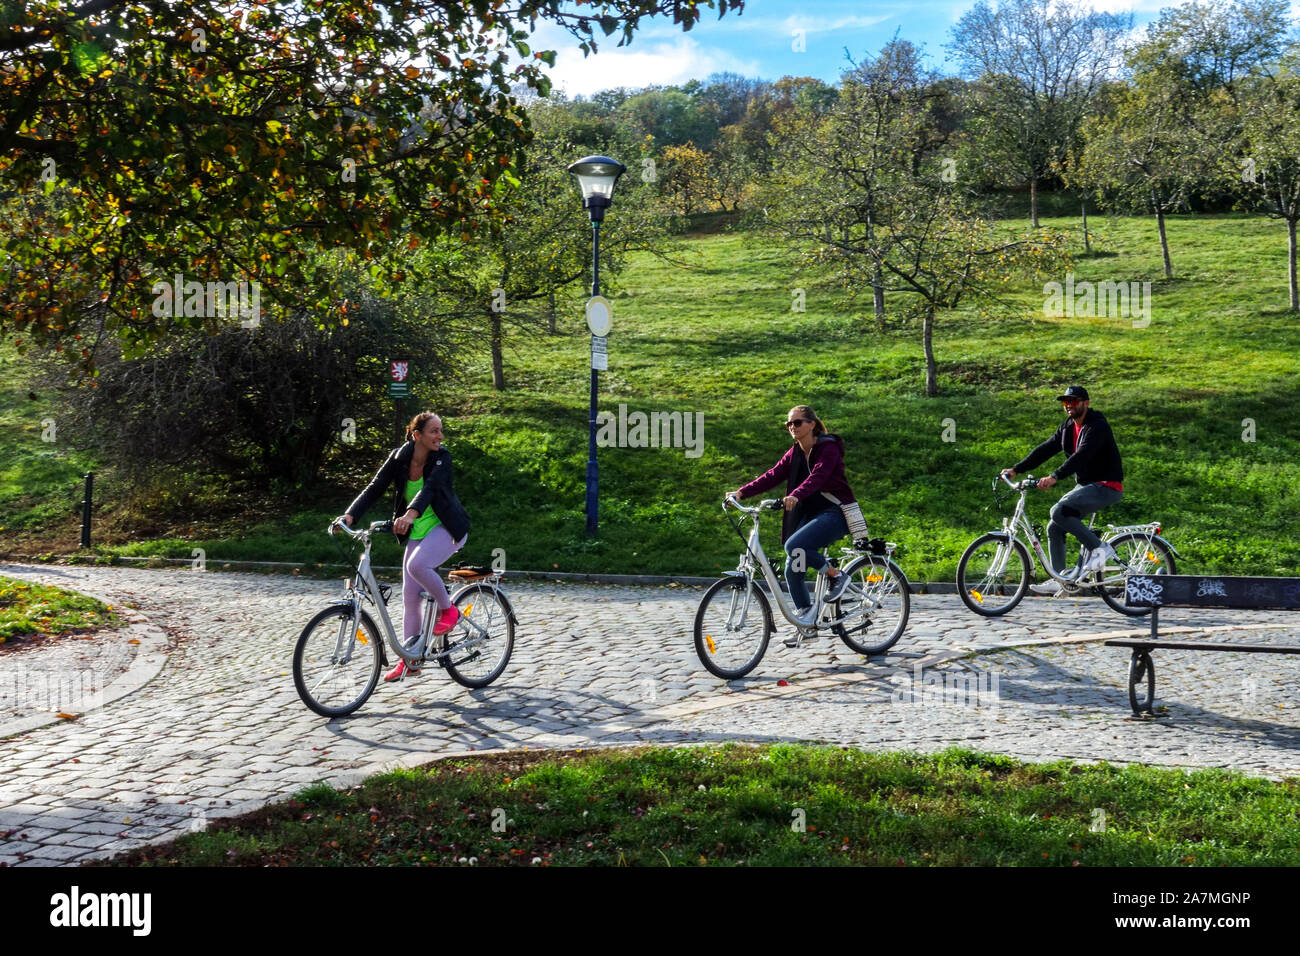 Prague Tourists Riding bike People Cycling Petrin Hill Park Prague City Park Bicycle Young Bikers Bike Tour Activities City life Cycle Route Leisure Stock Photo